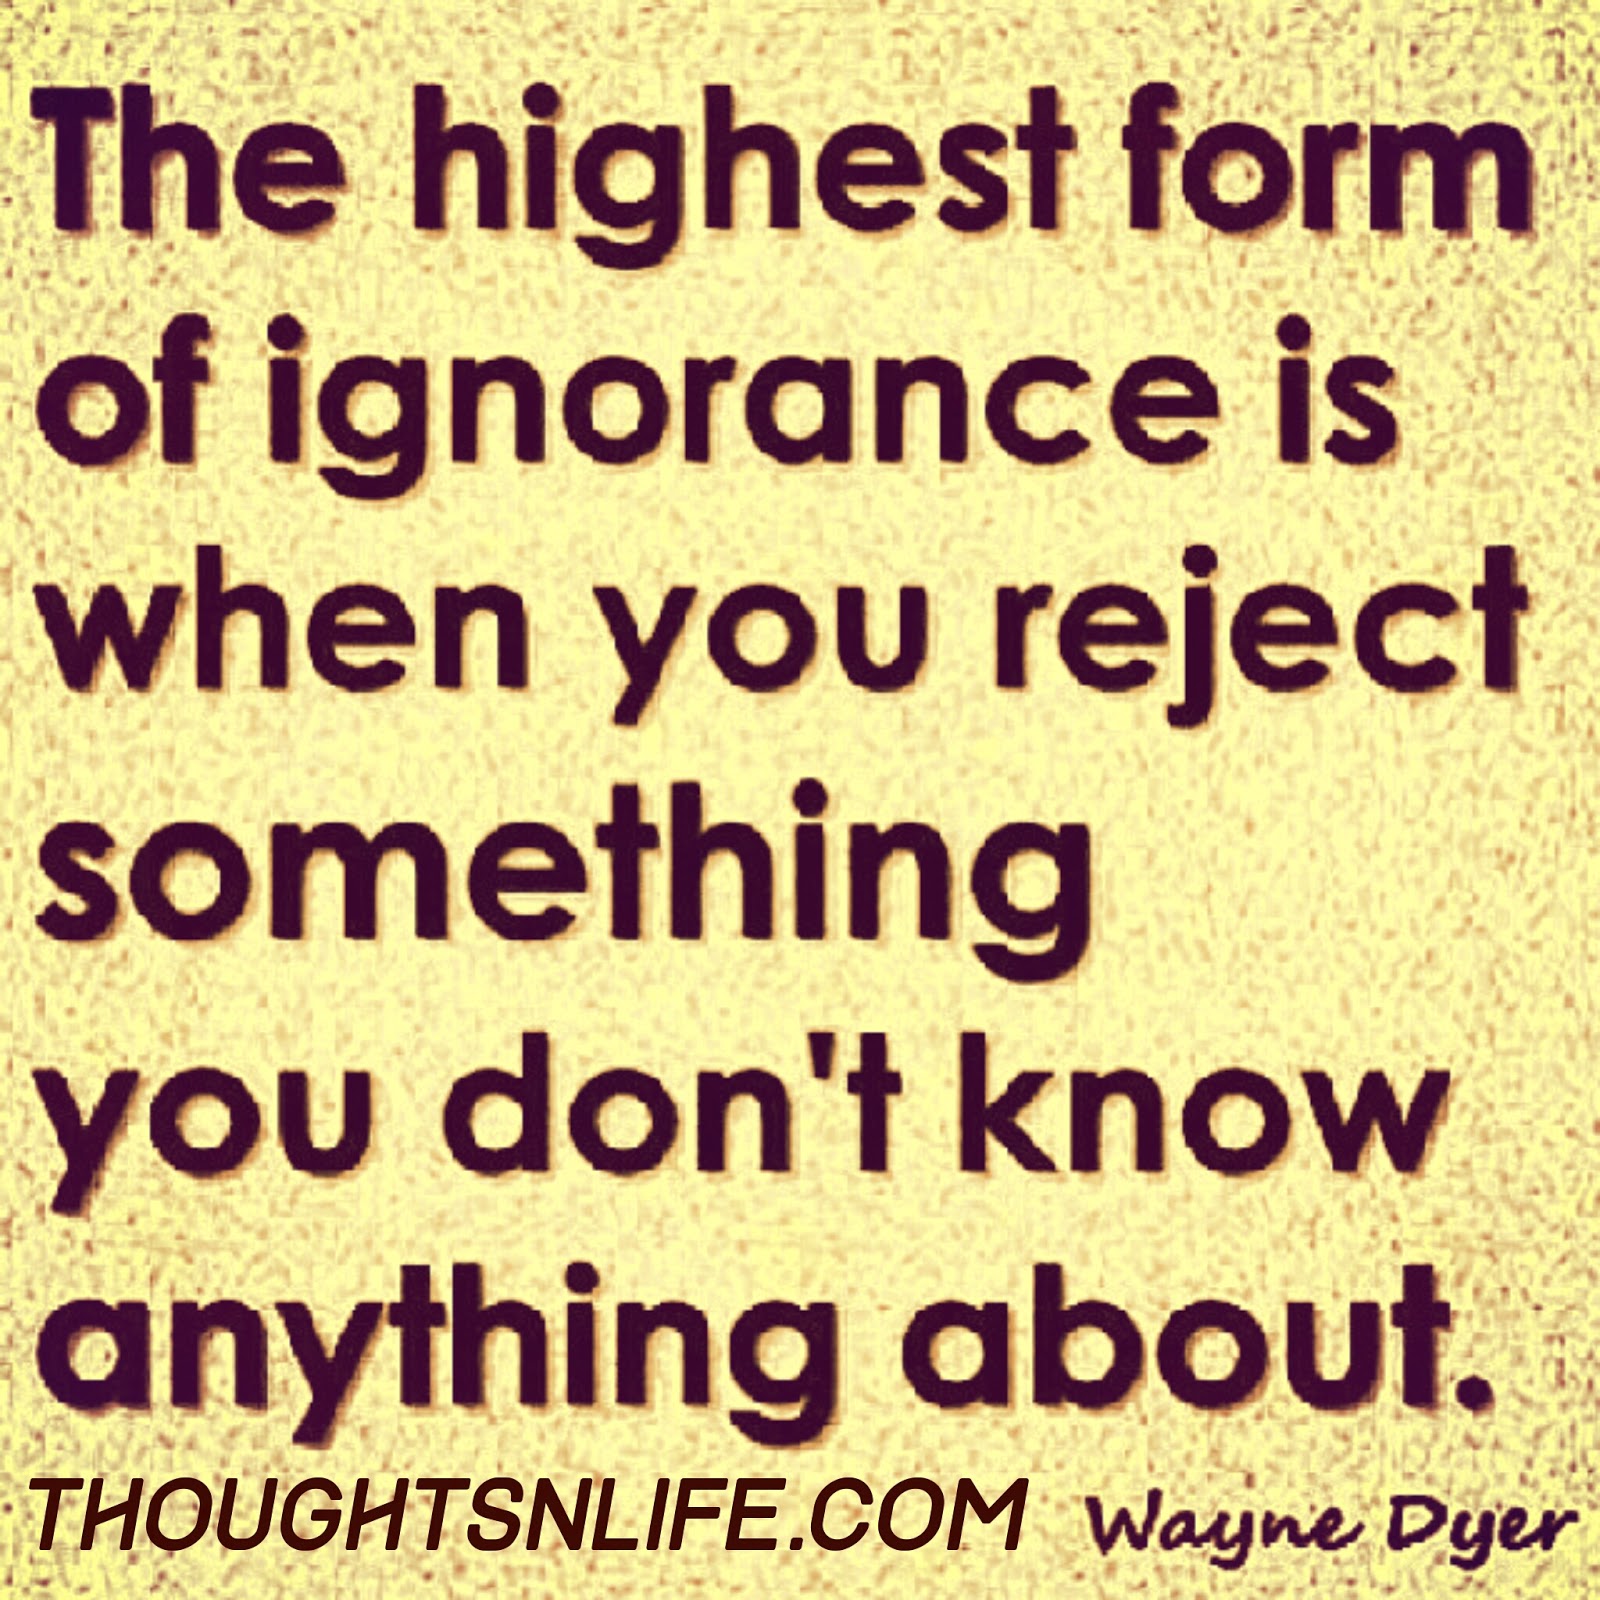 thoughtsnlife, wayne dyer quotes ,wayne dyer quotes ignorance